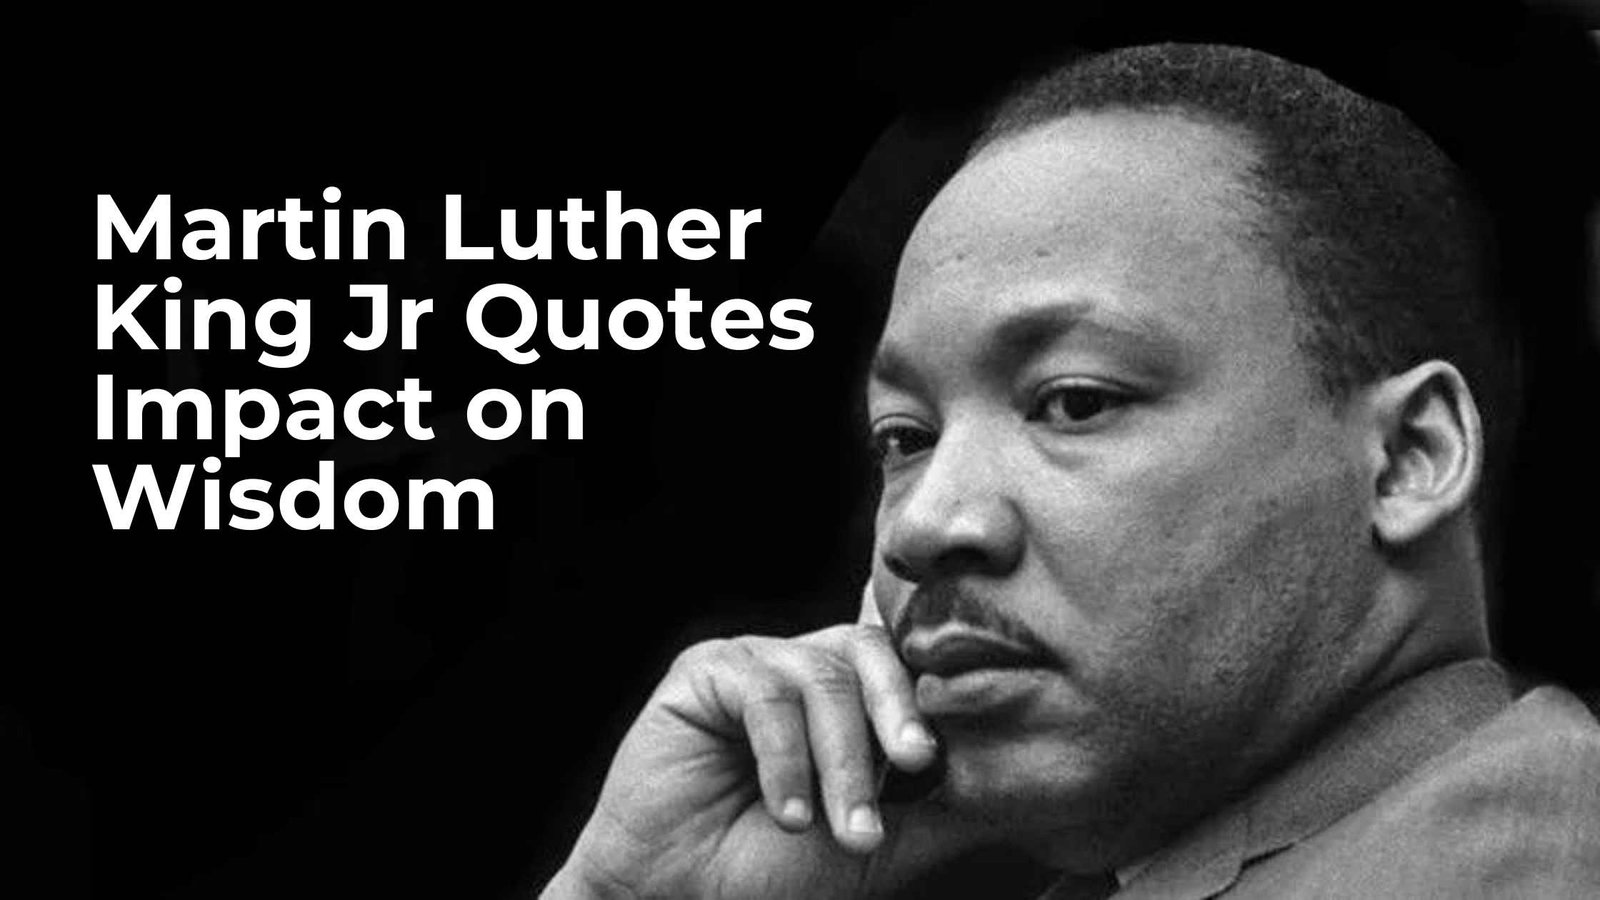 Martin Luther King Jr Quotes with Martin Luther King Jr on the image.